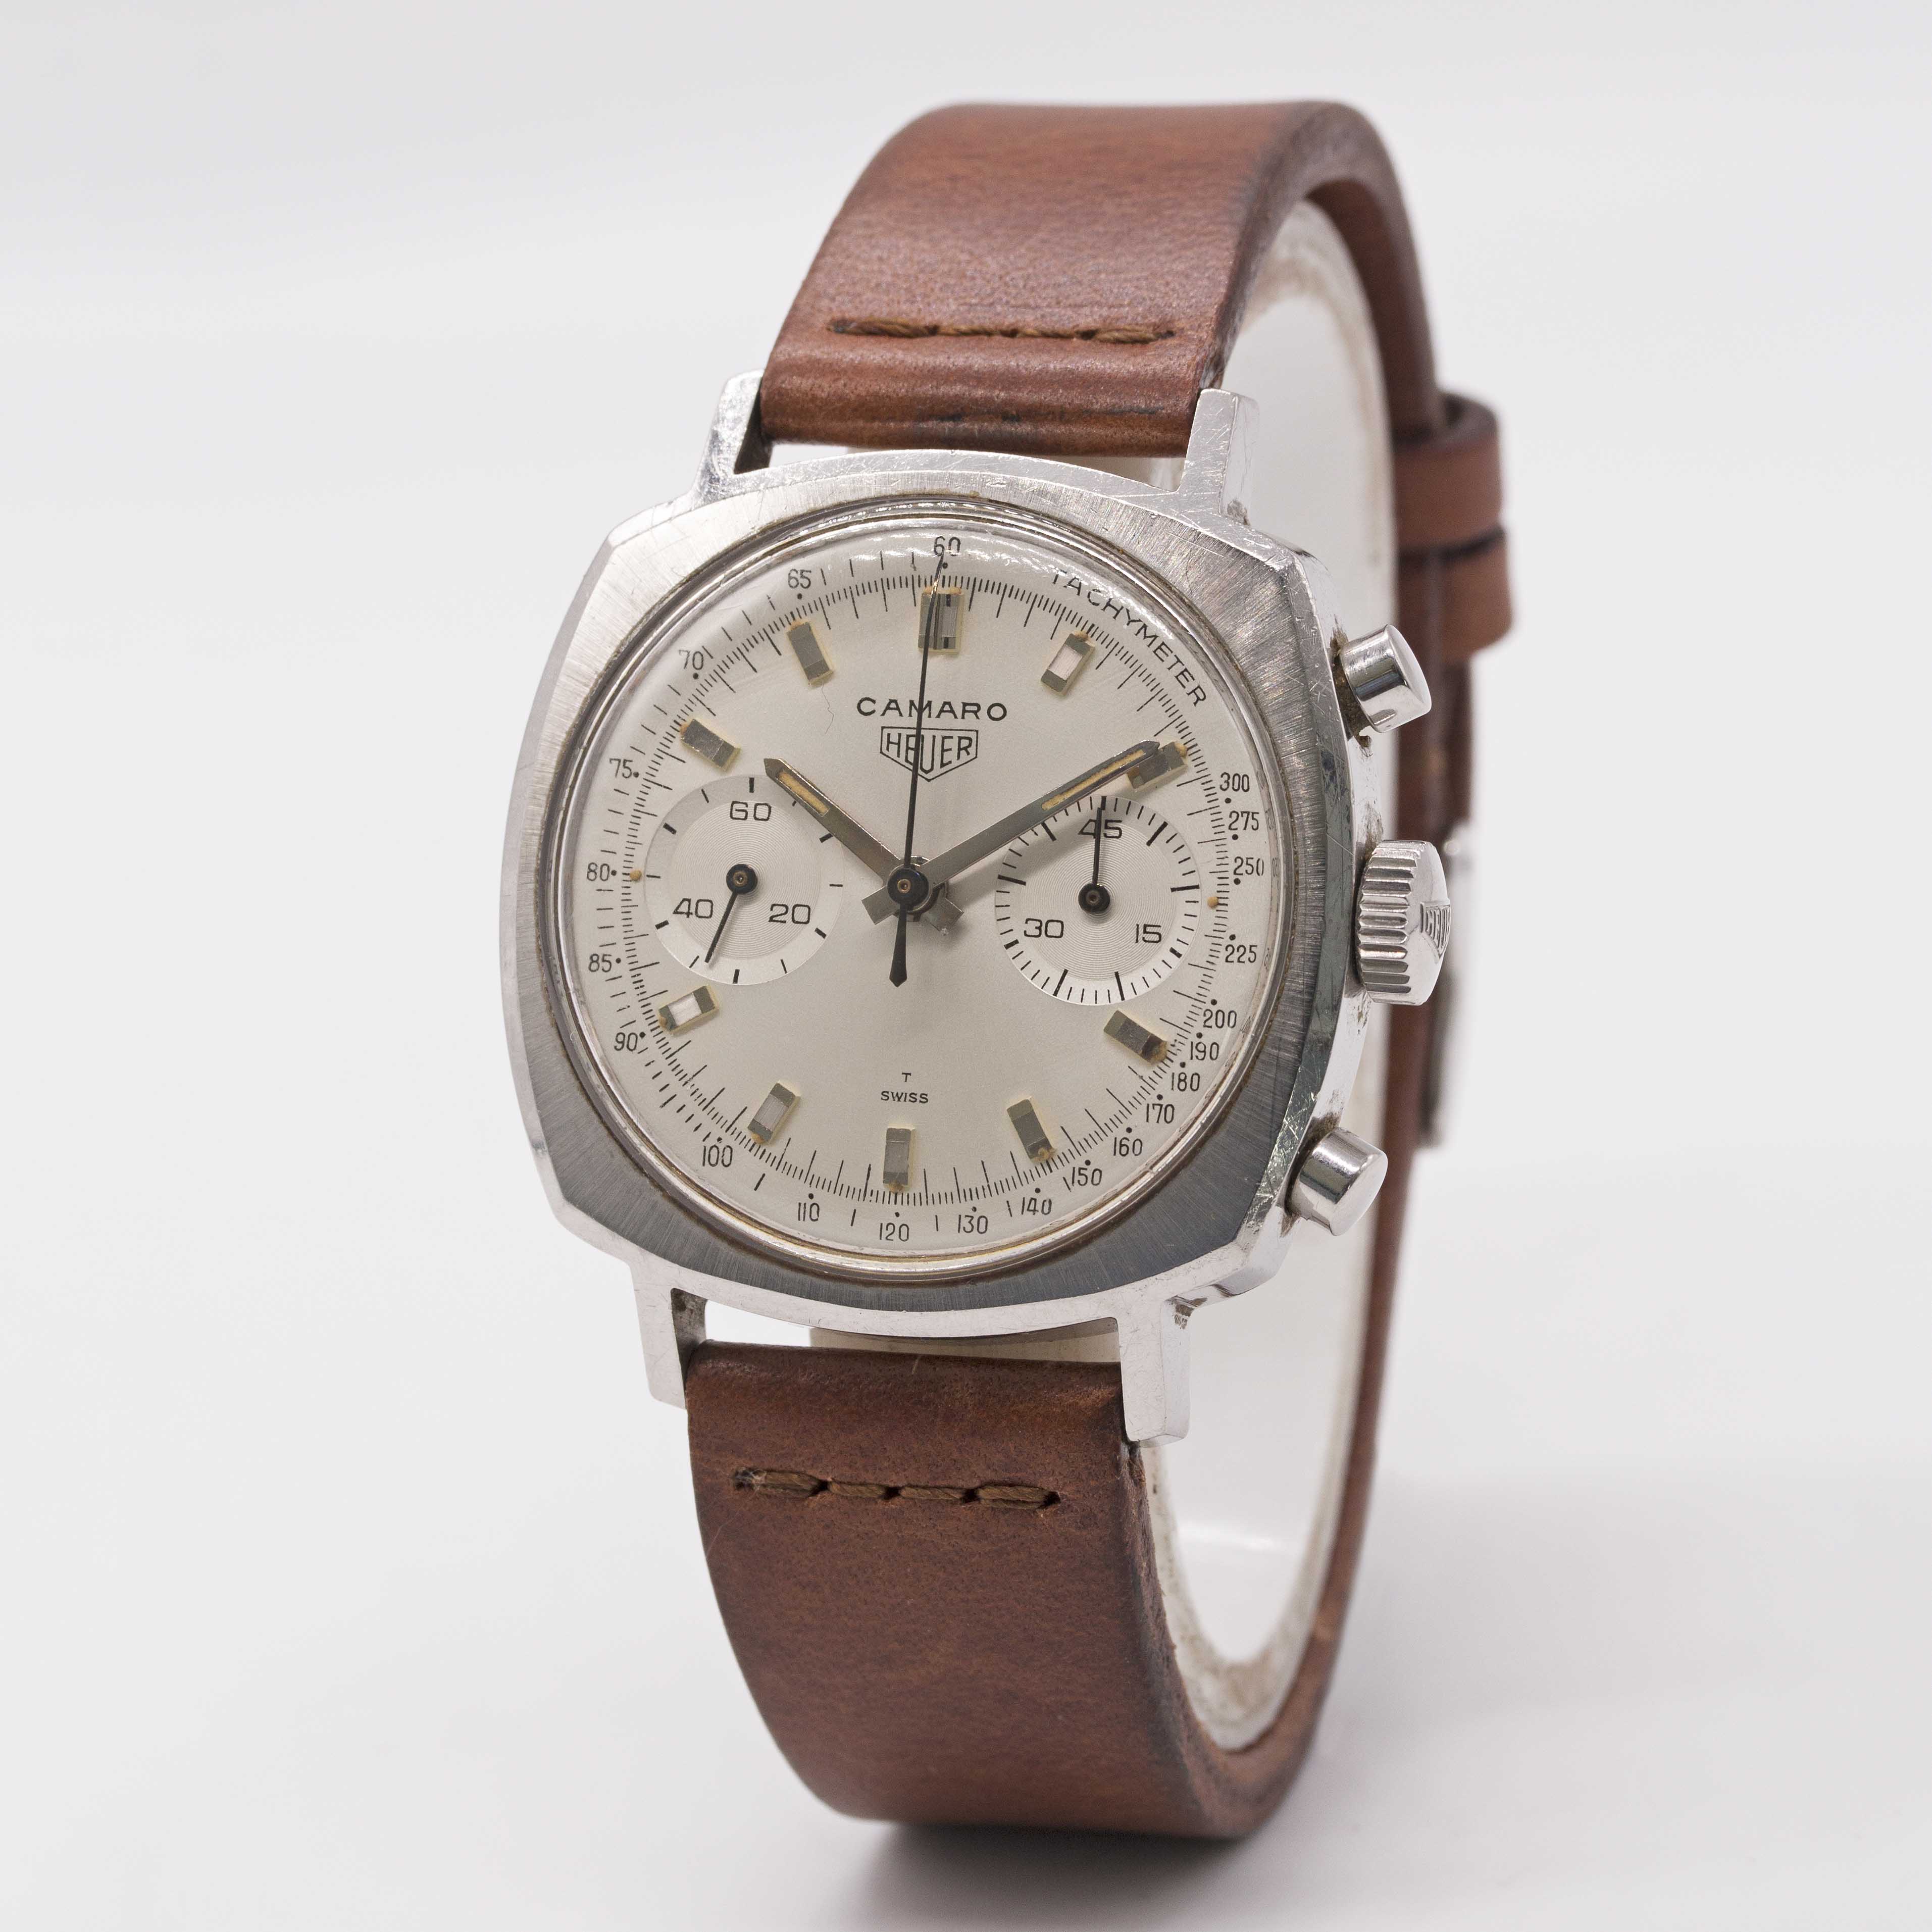 A GENTLEMAN'S STAINLESS STEEL HEUER CAMARO CHRONOGRAPH WRIST WATCH CIRCA 1970, REF. 9220T WITH - Image 4 of 9